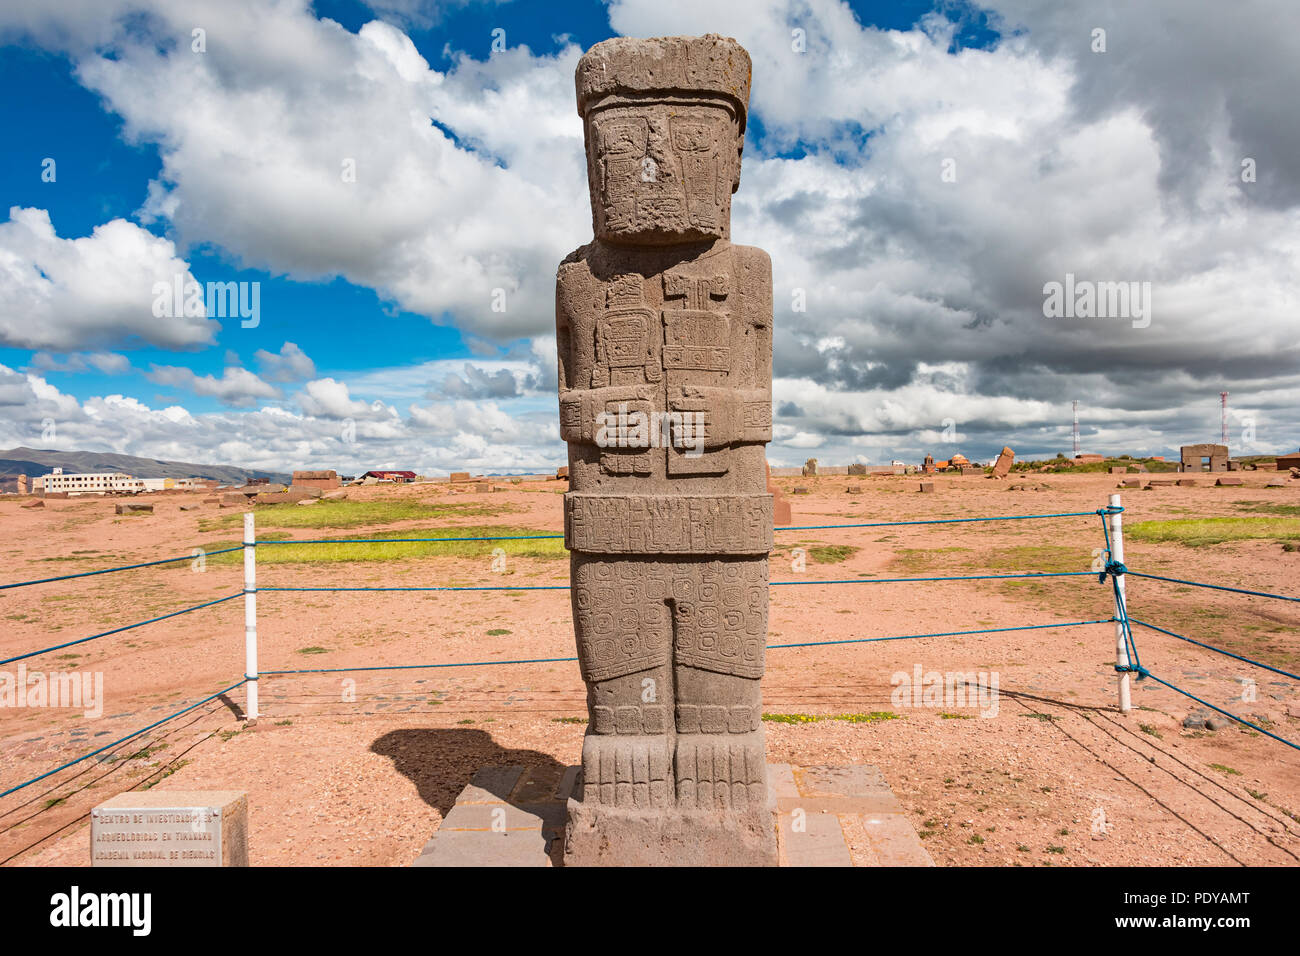 Statue at Tiwanaku archaeological site in Bolivia Stock Photo